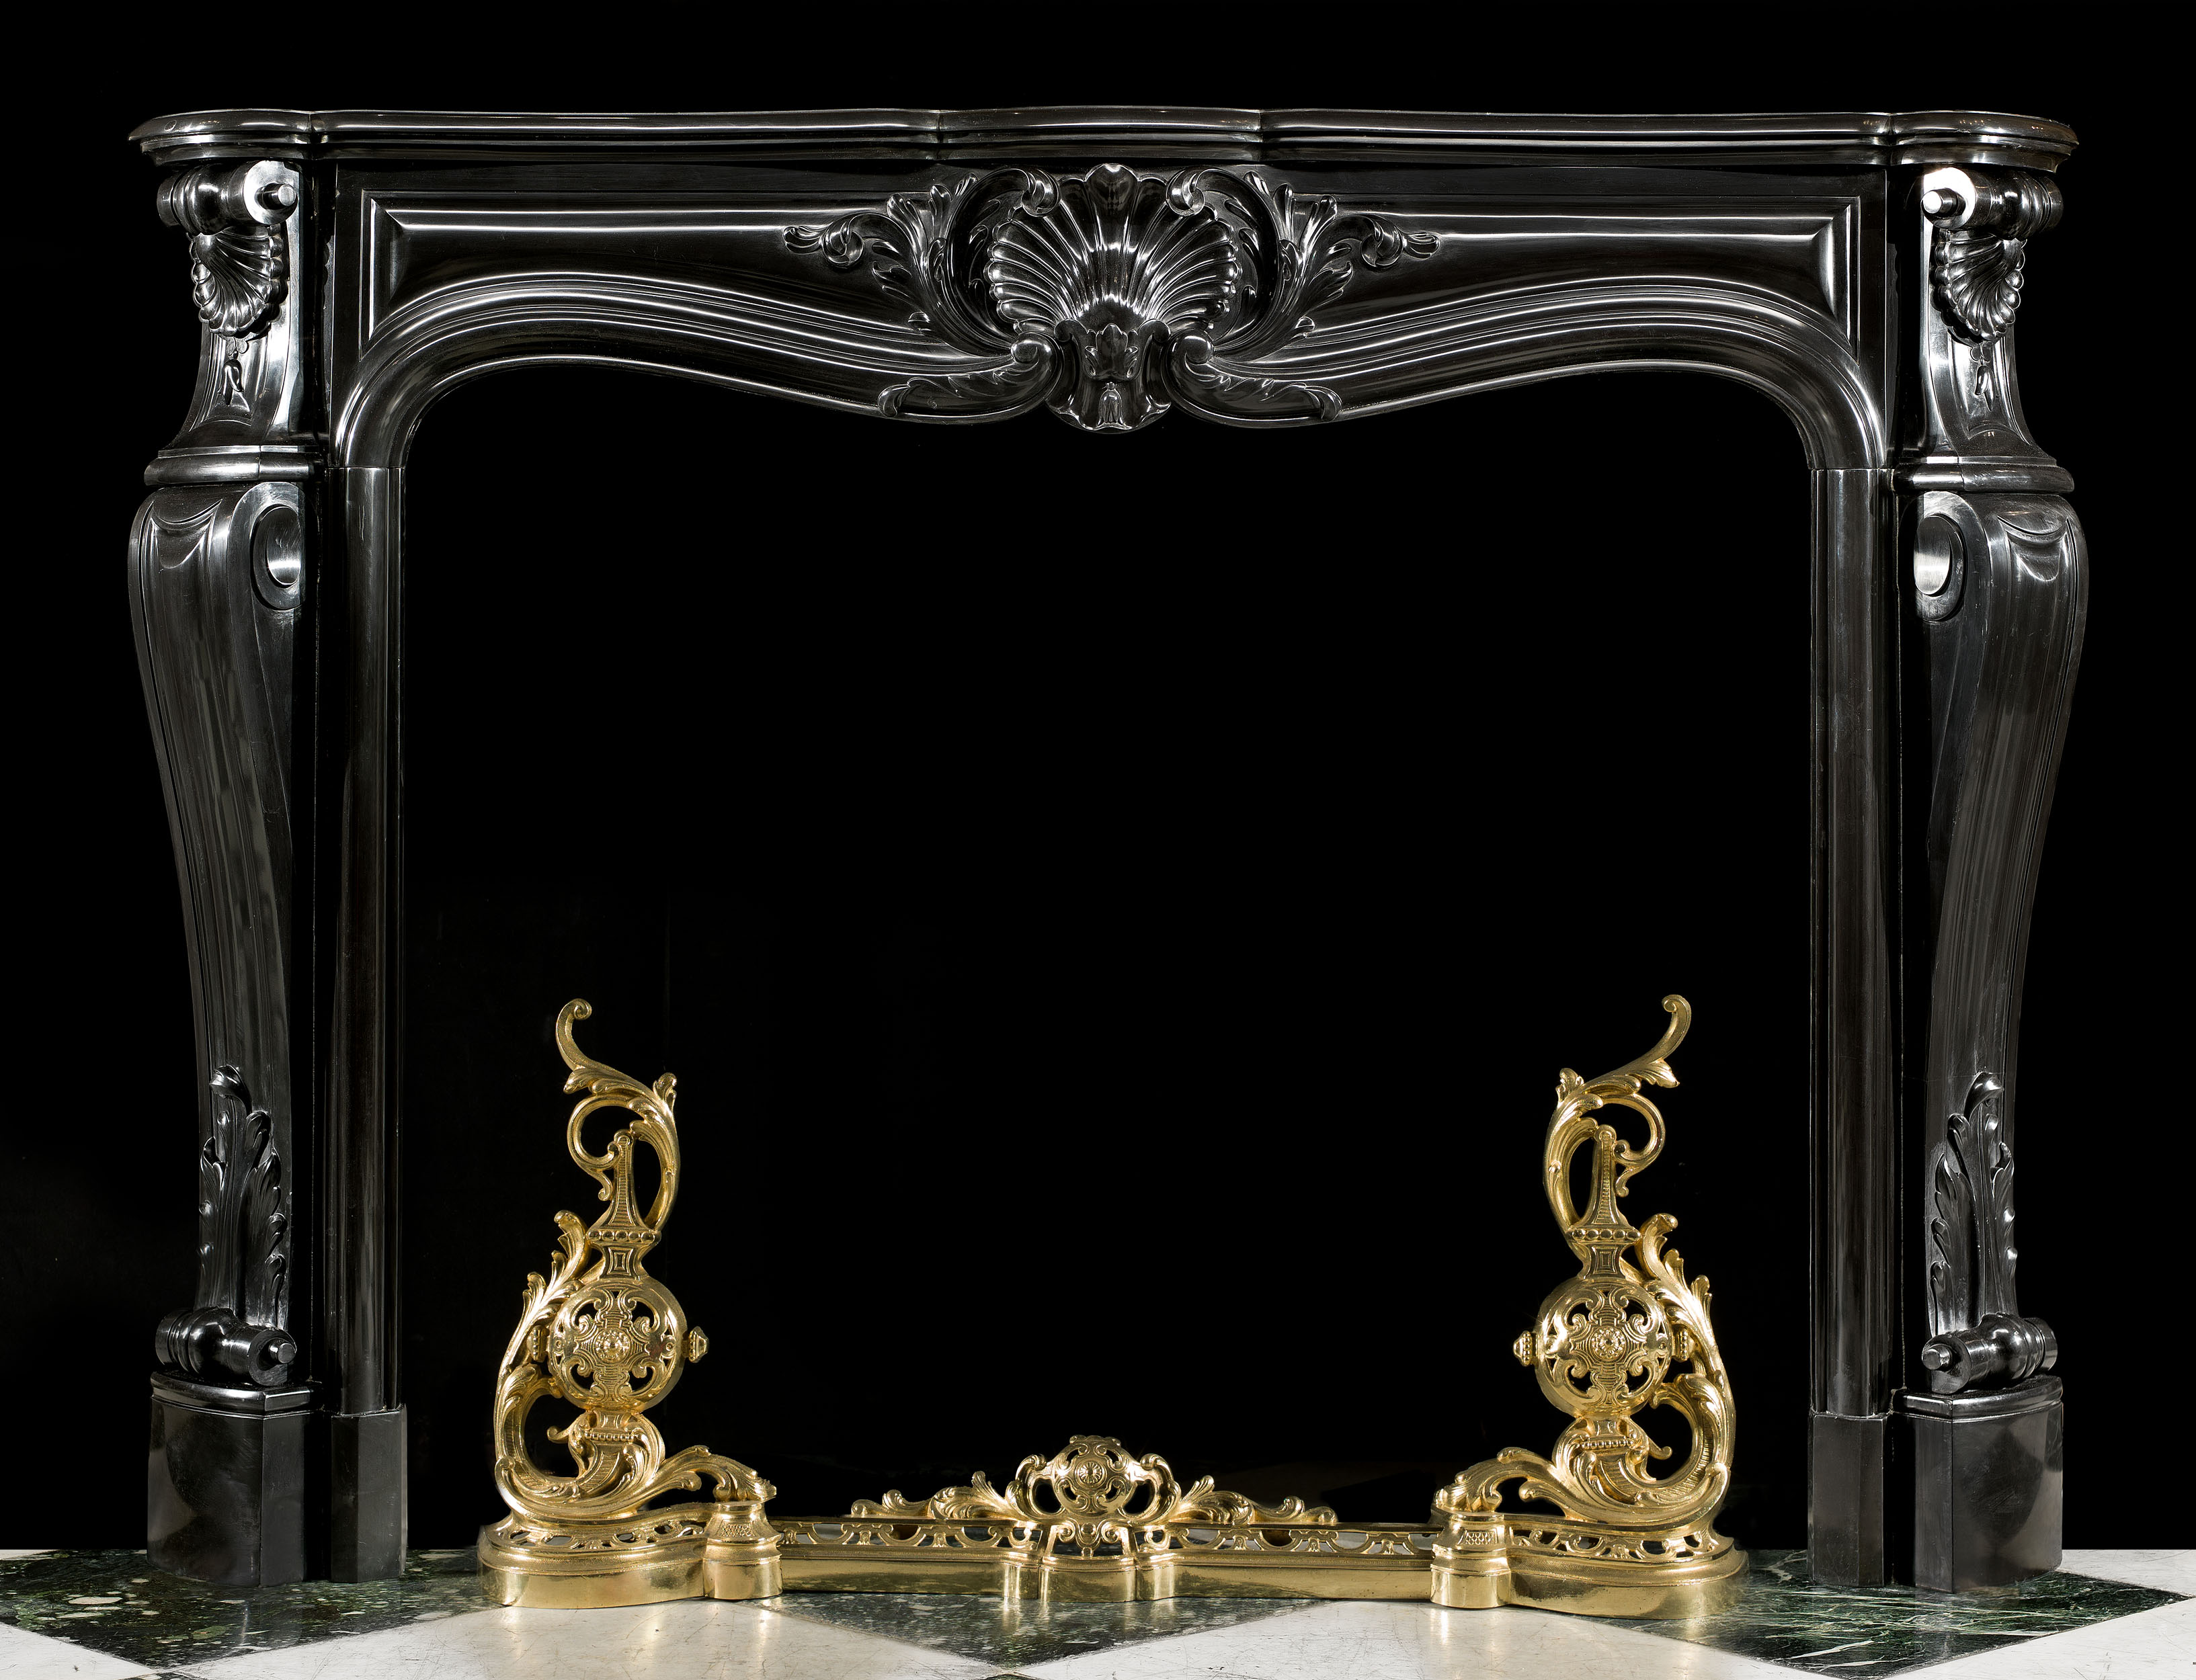 An elegant Belgian Black Marble French Louis XV style Rococo antique chimneypiece.